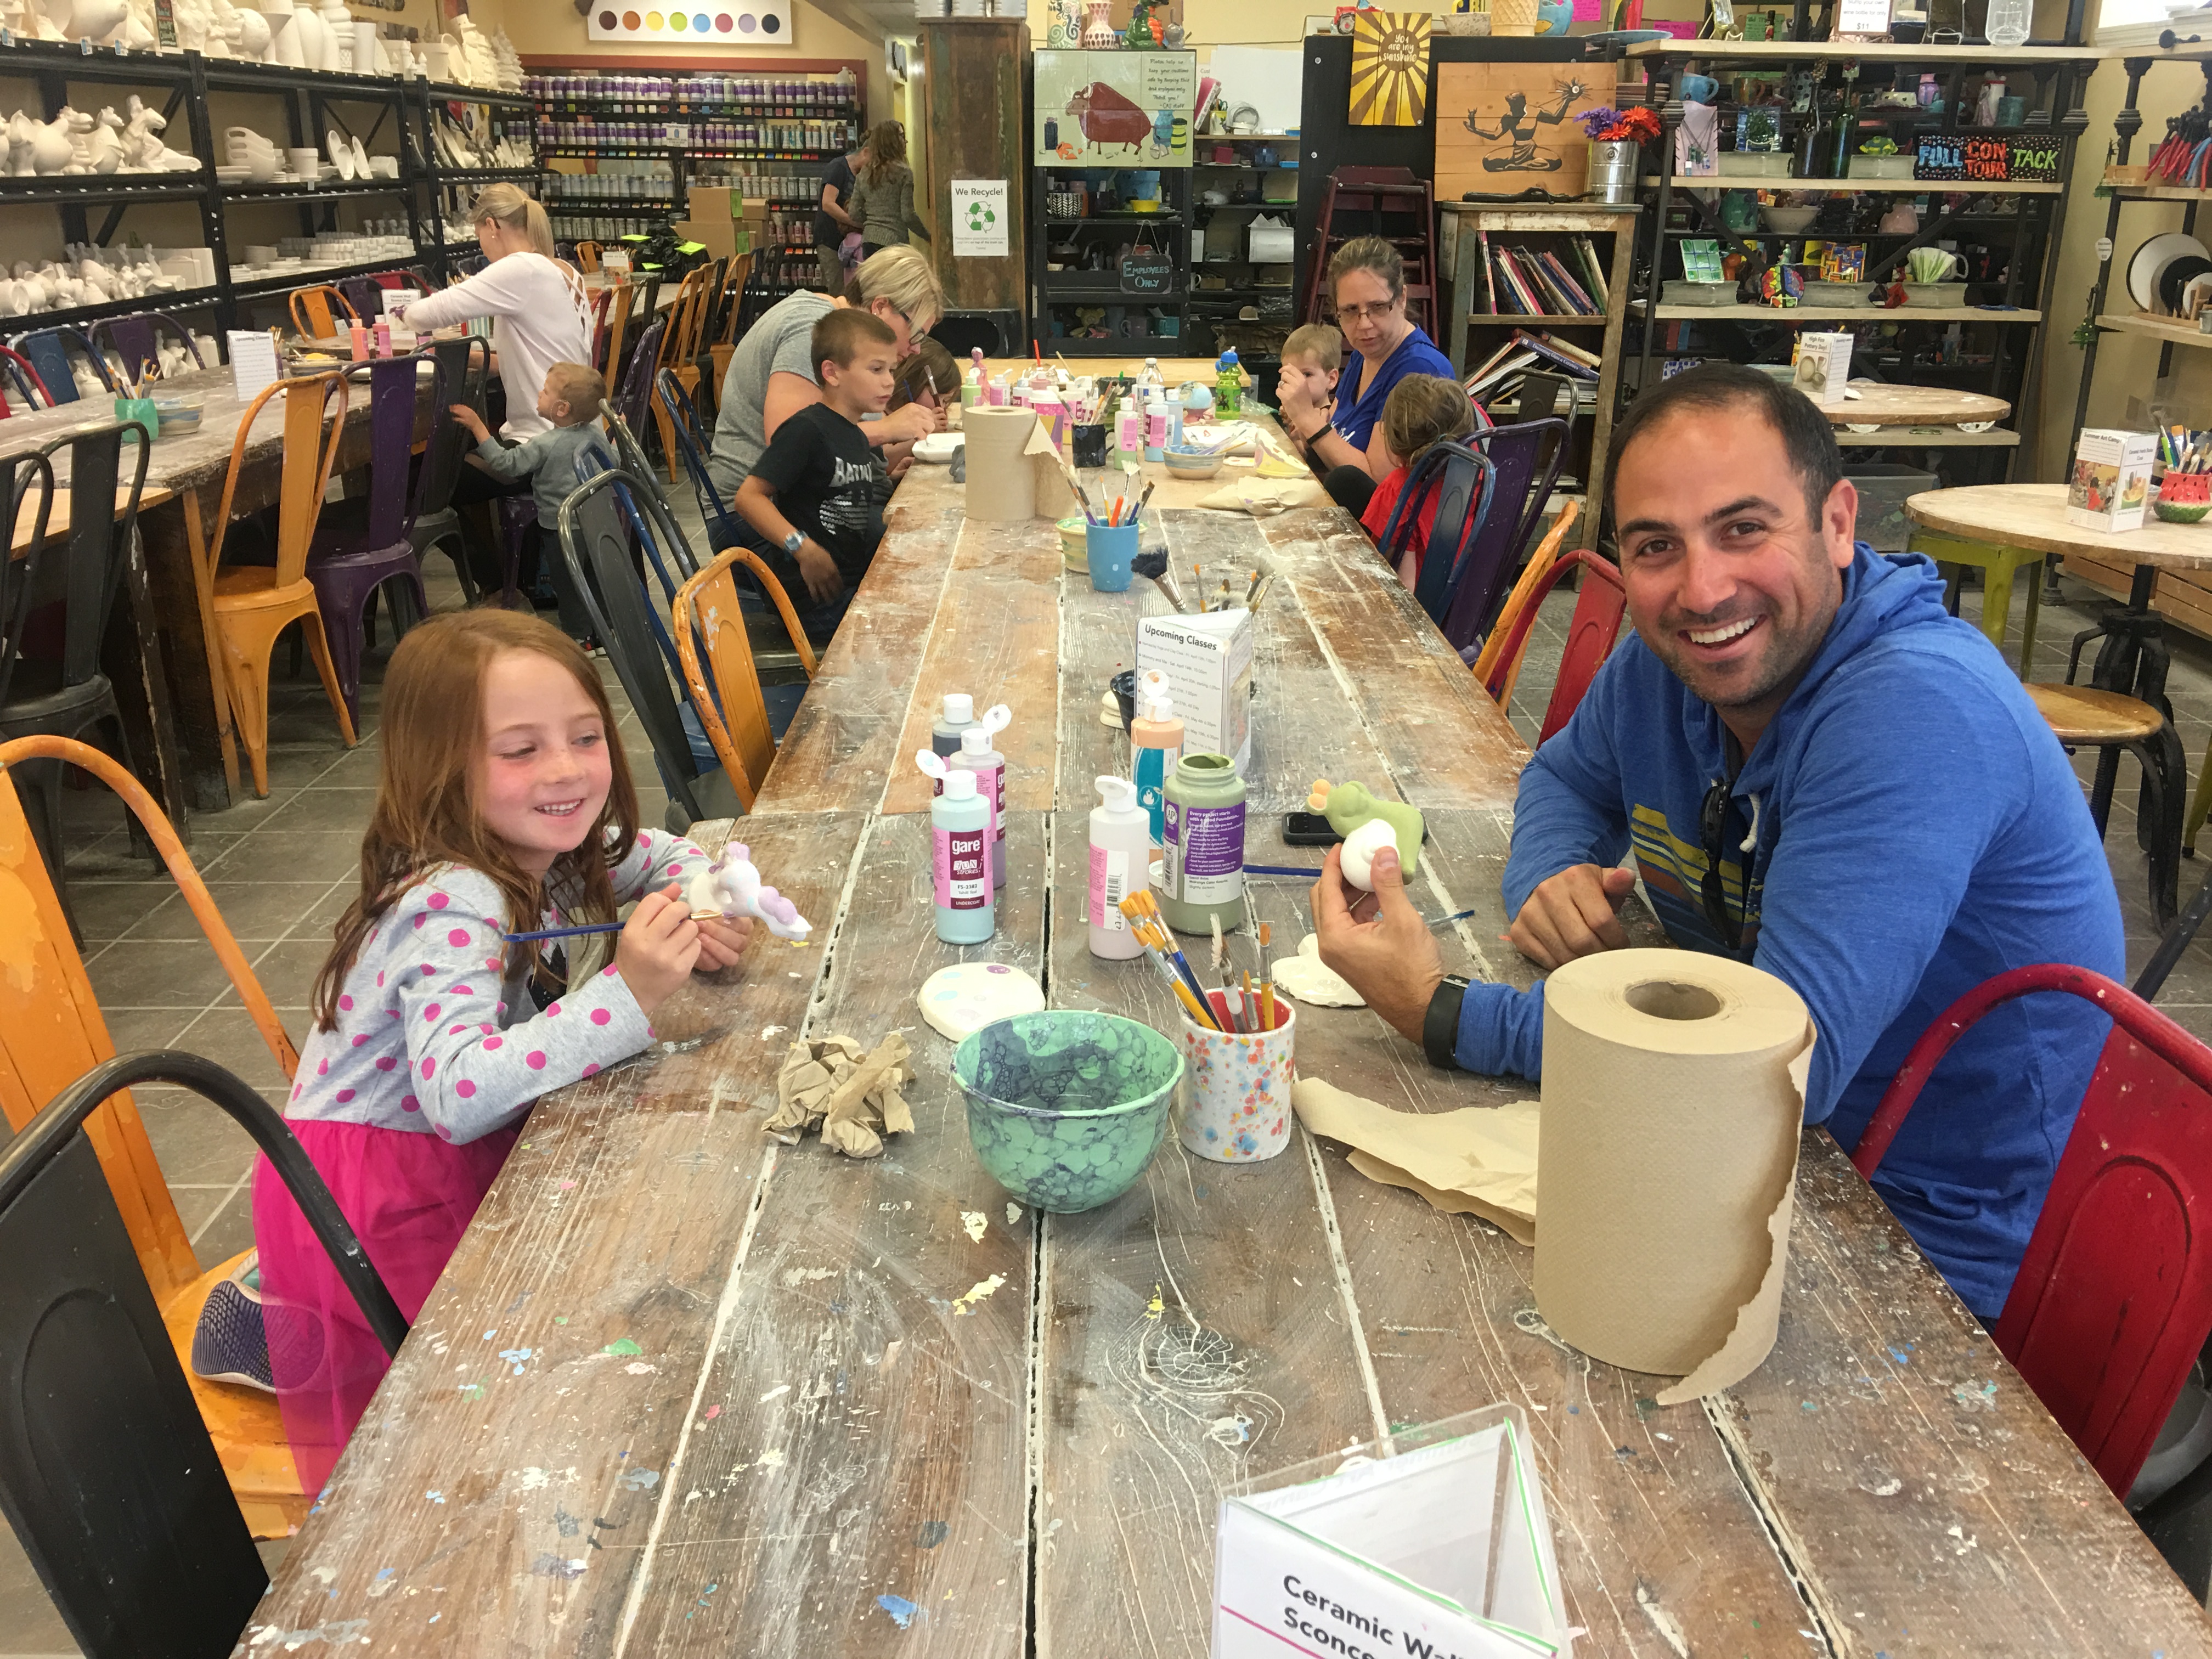 How to Center Clay: A Step-by-Step Guide  Creative Arts Studios Royal Oak  Pottery Painting